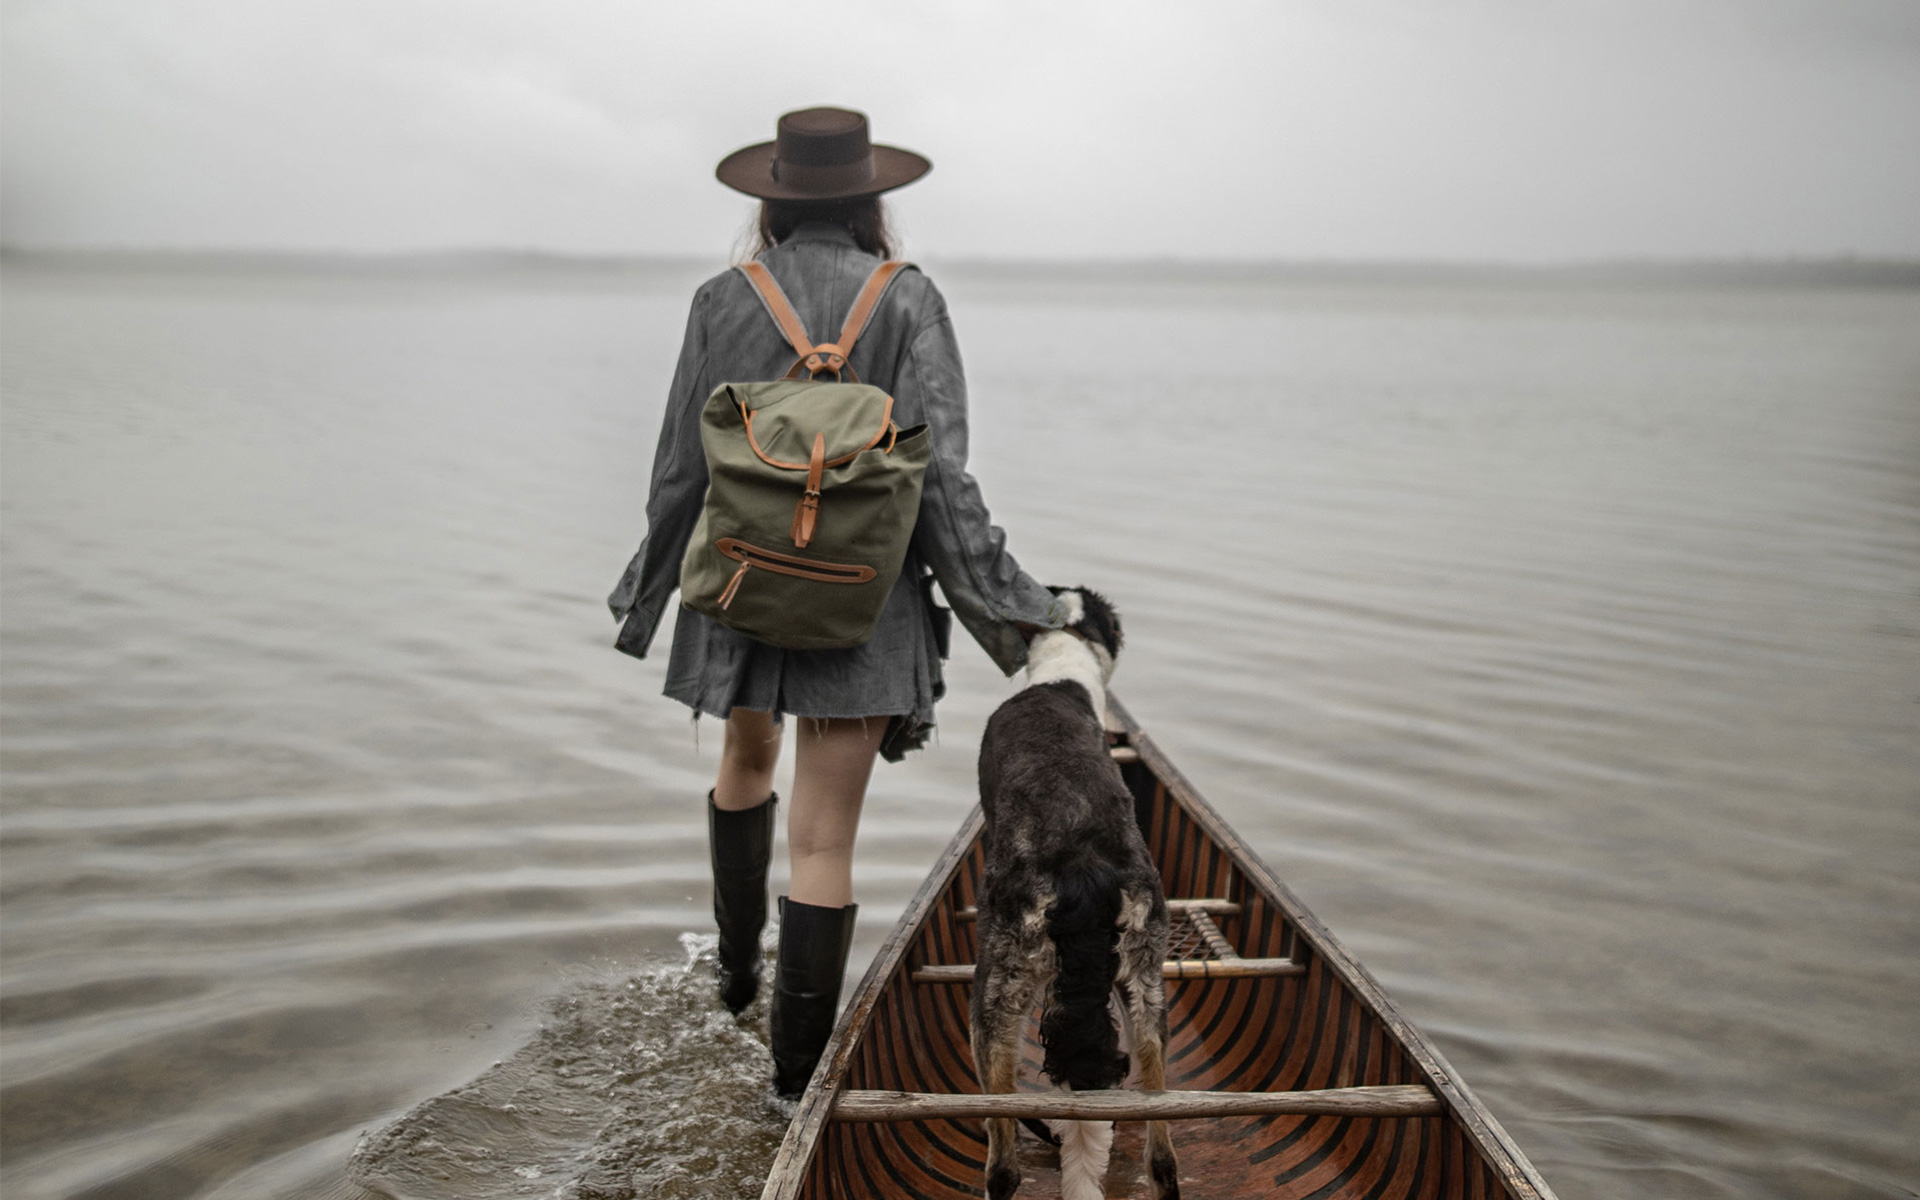 A woman walks through the water, carrying a canvas backpack and towing a boat